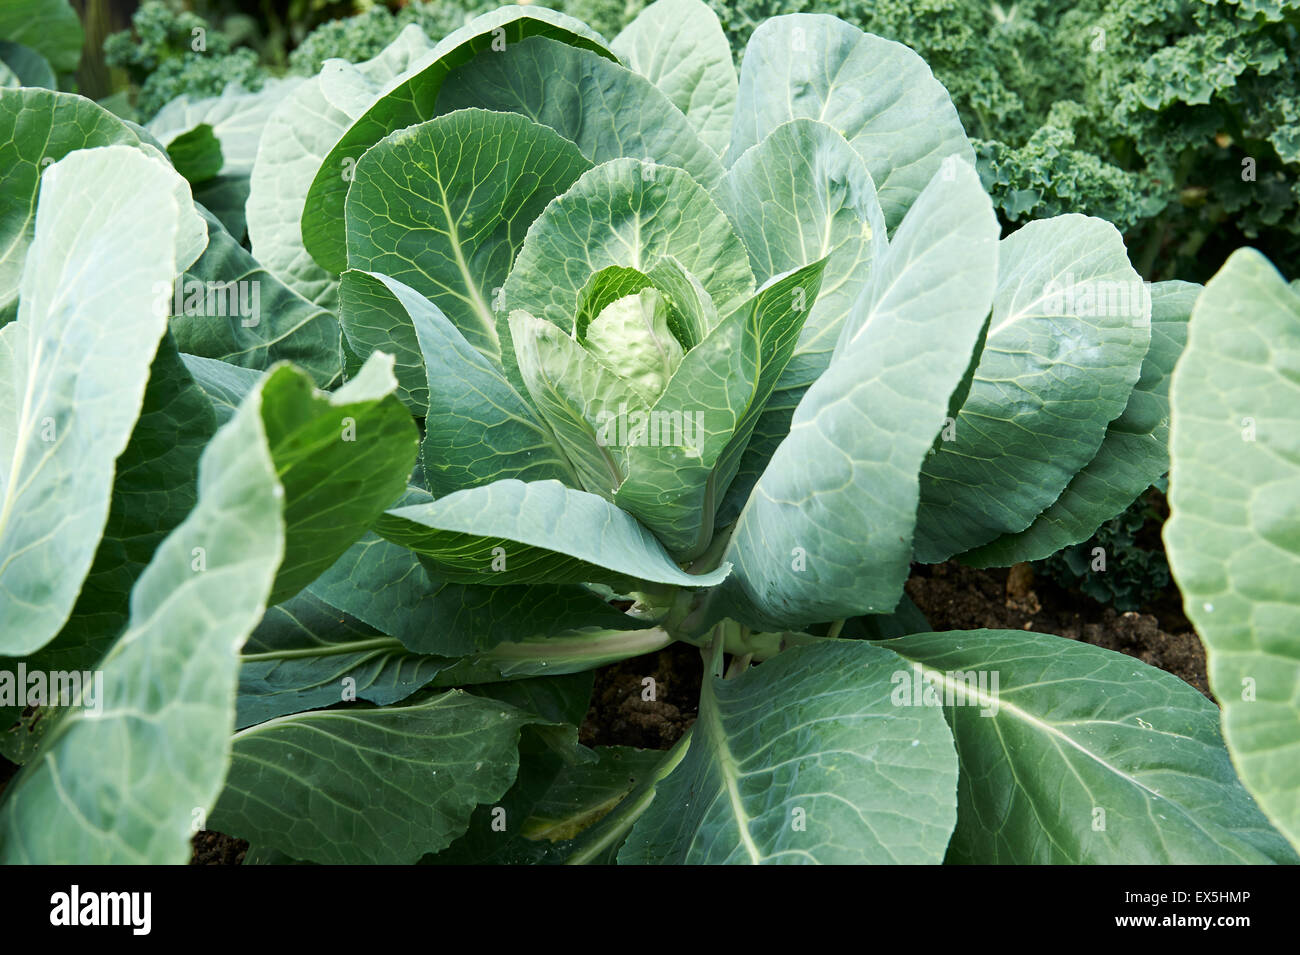 Cabbage Plants Growing in a Vegetable Garden. Stock Photo